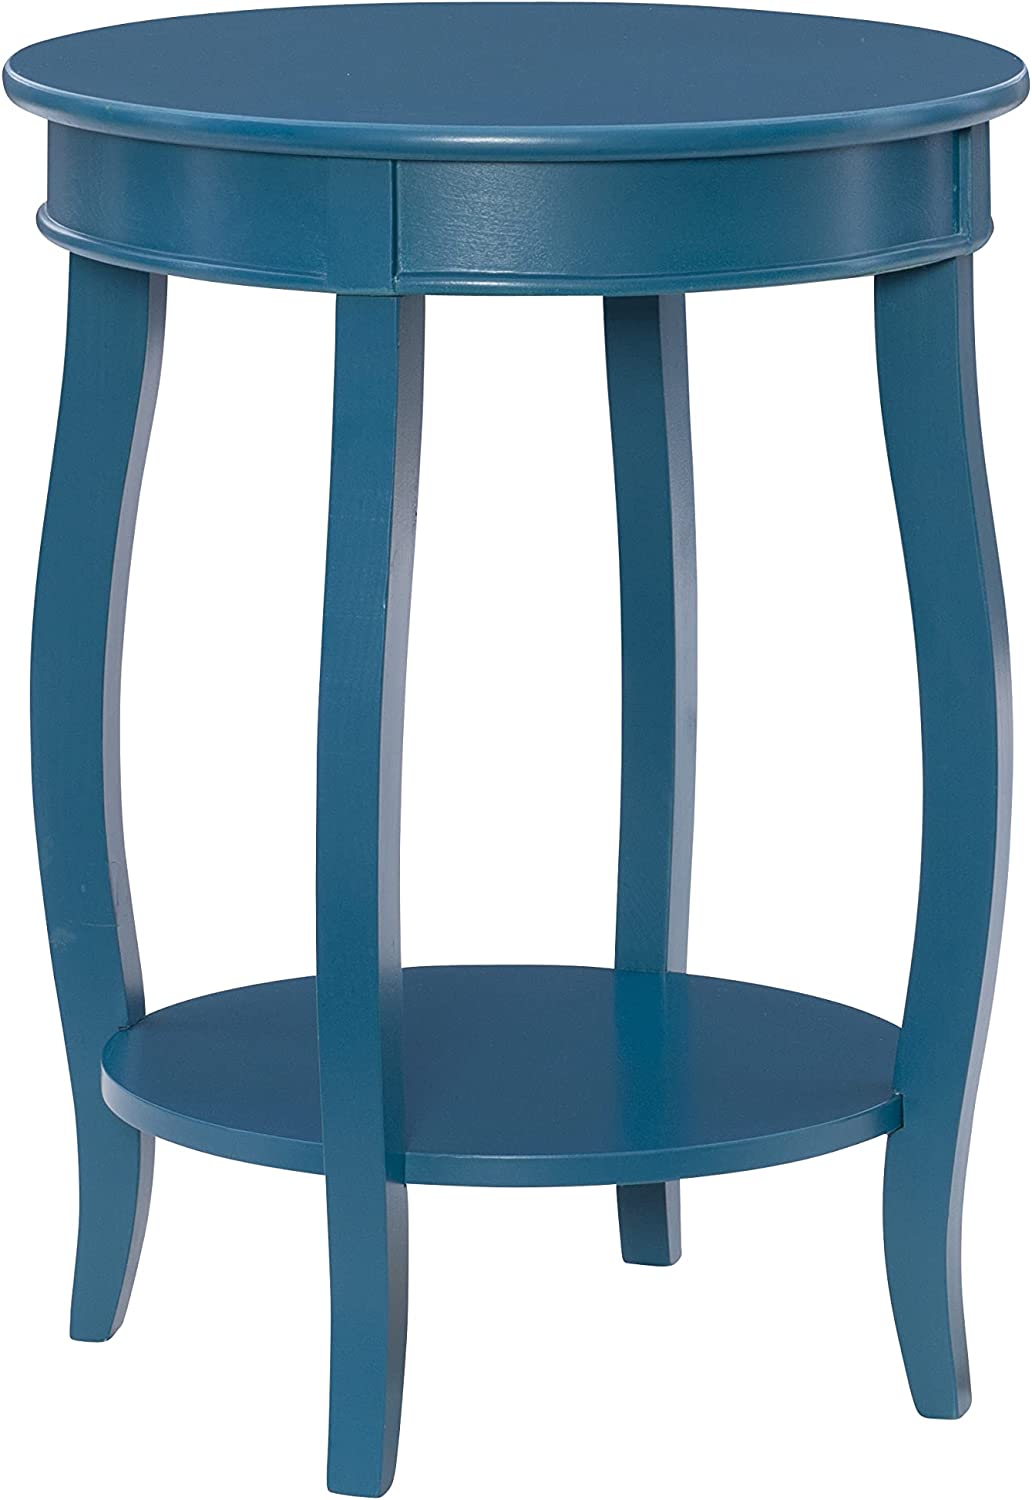 Powell Furniture Powell Teal Round Shelf Table